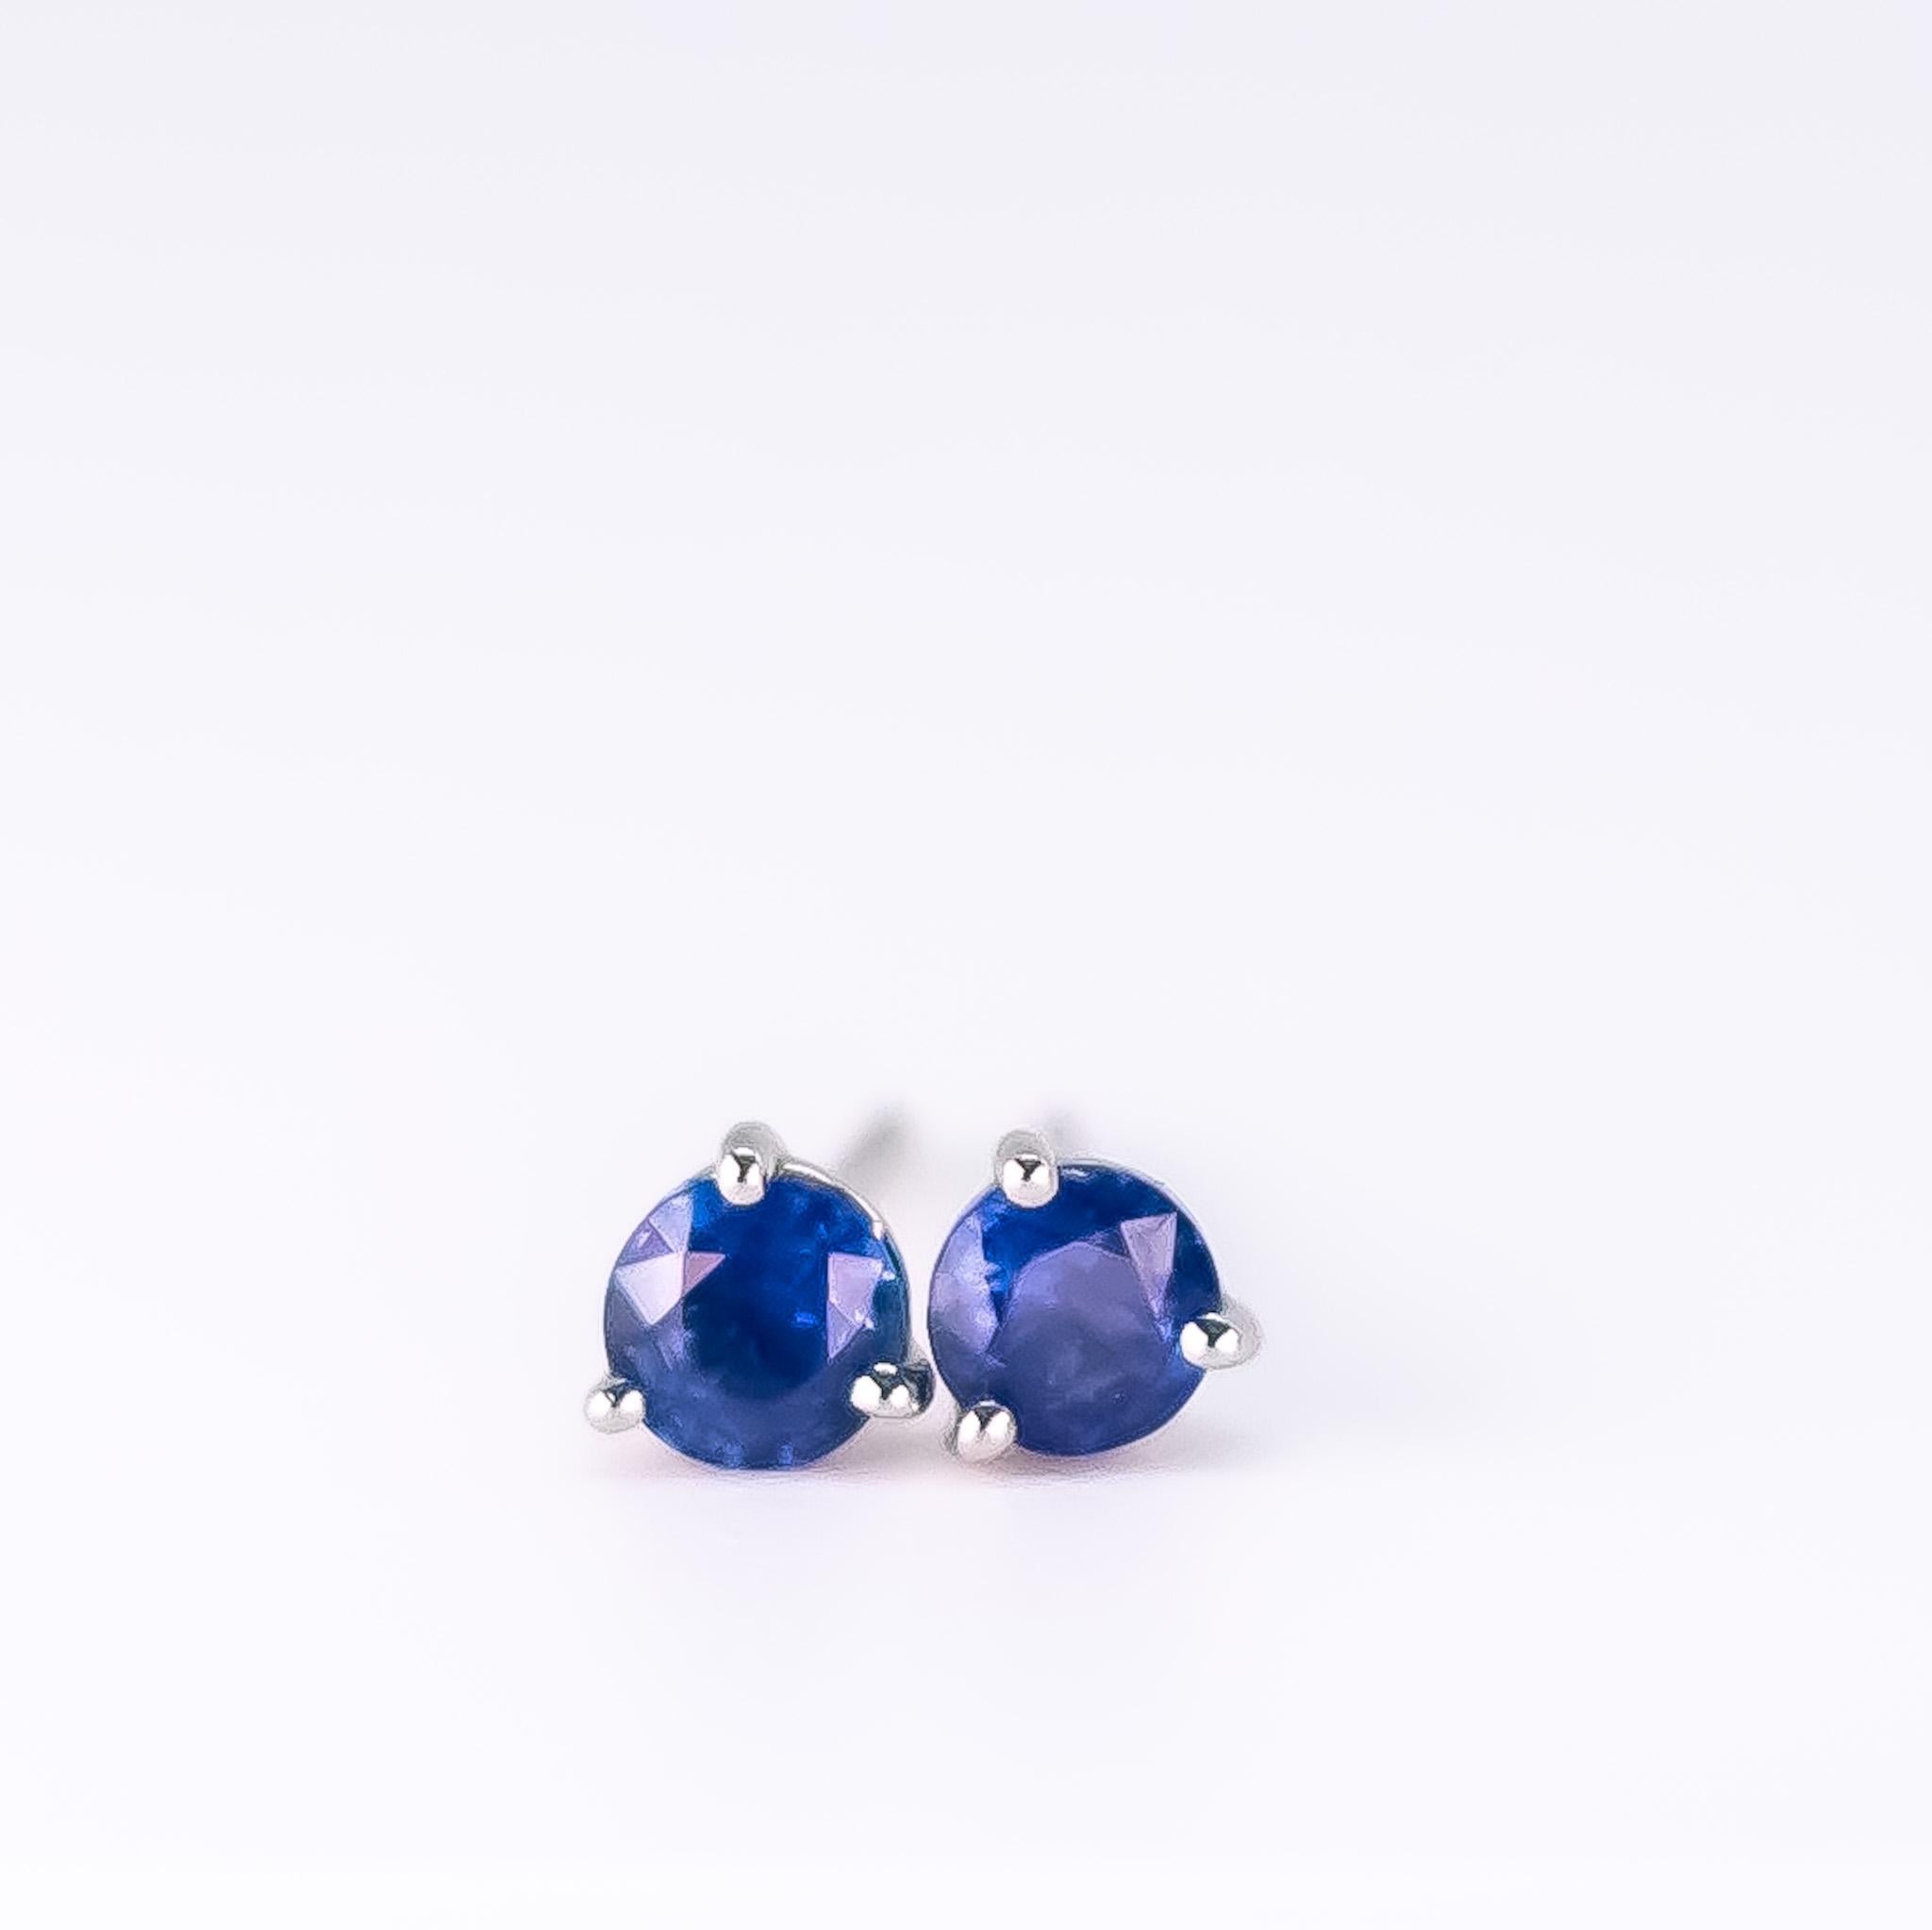 Beautiful round blue sapphire studs set in Platinum. 

These Ceylon sapphires are a stunning blue colour and medium tone, not too light and not too dar. The studs are set in a three prong martini setting with a butterfly push back. 

The blue